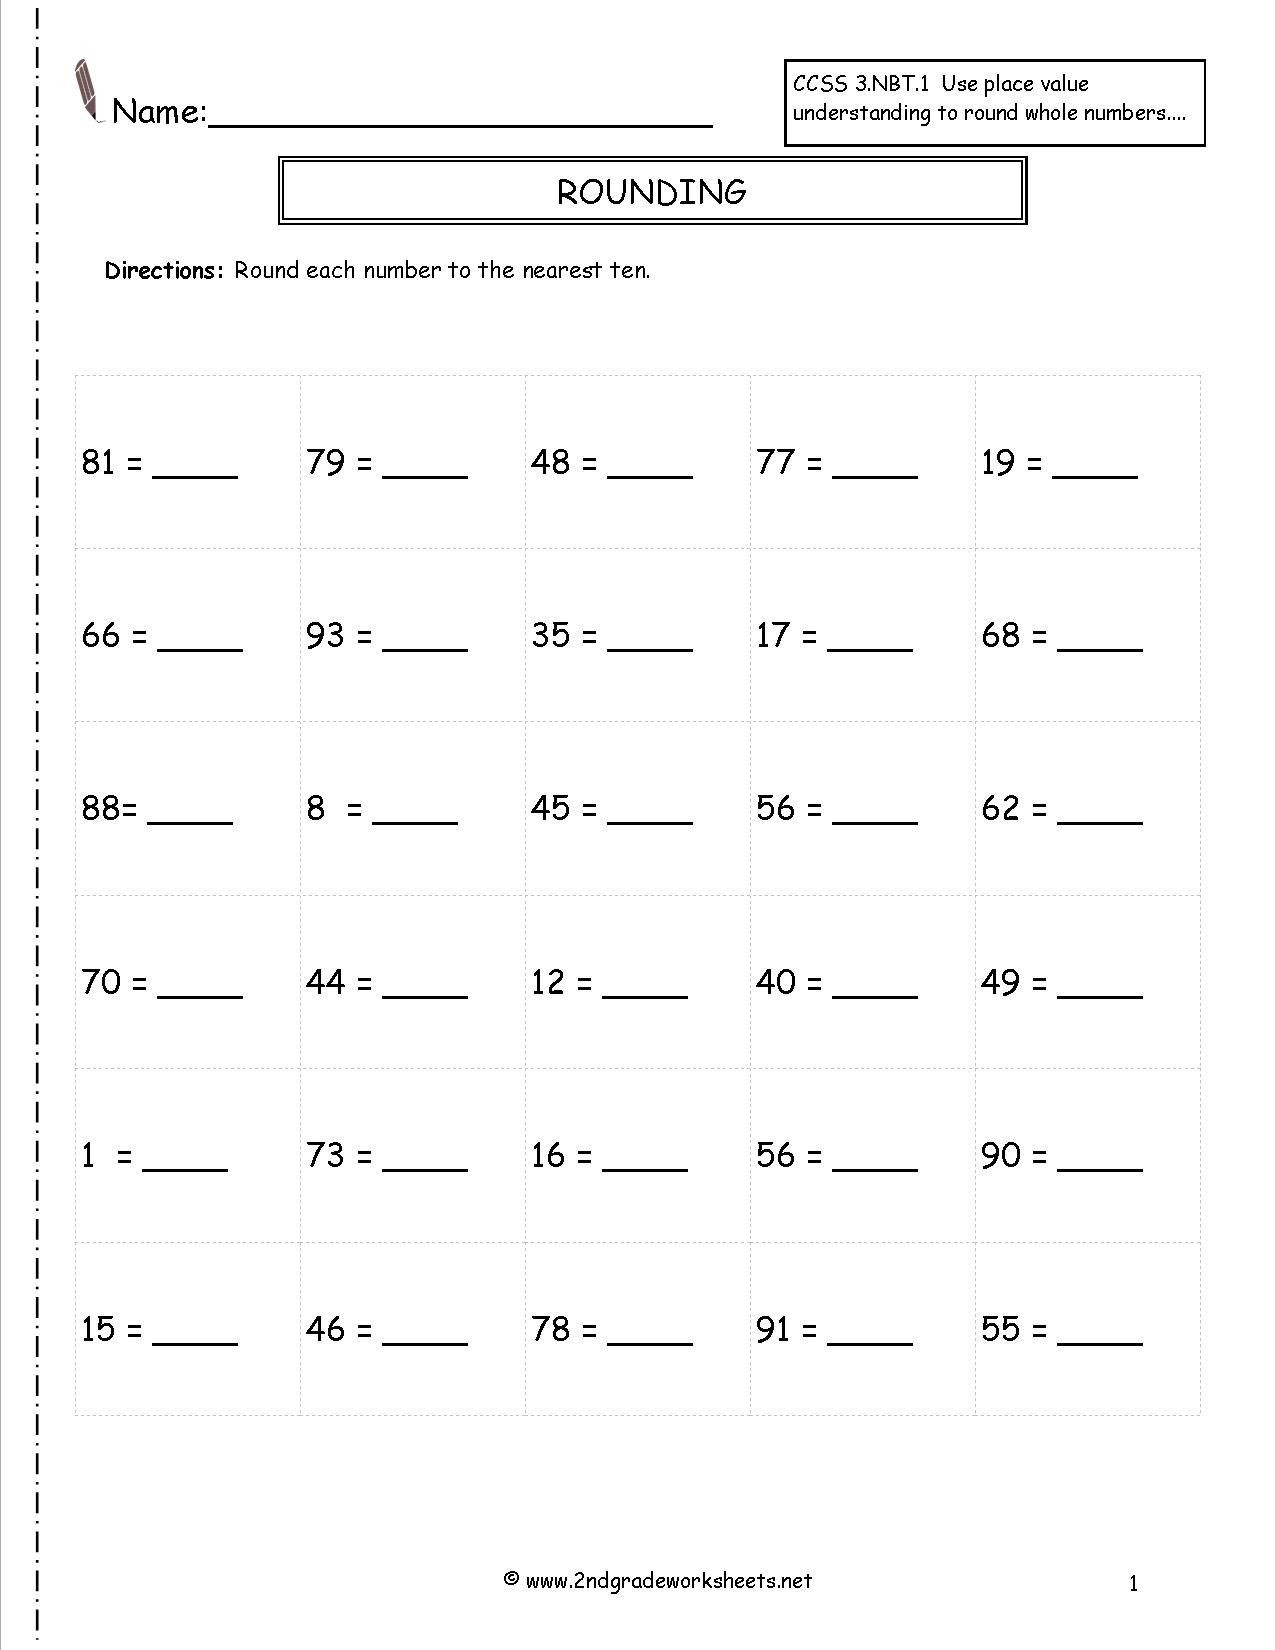 4th Grade Rounding Worksheets Rounding Worksheets 4th Grade for Download Rounding